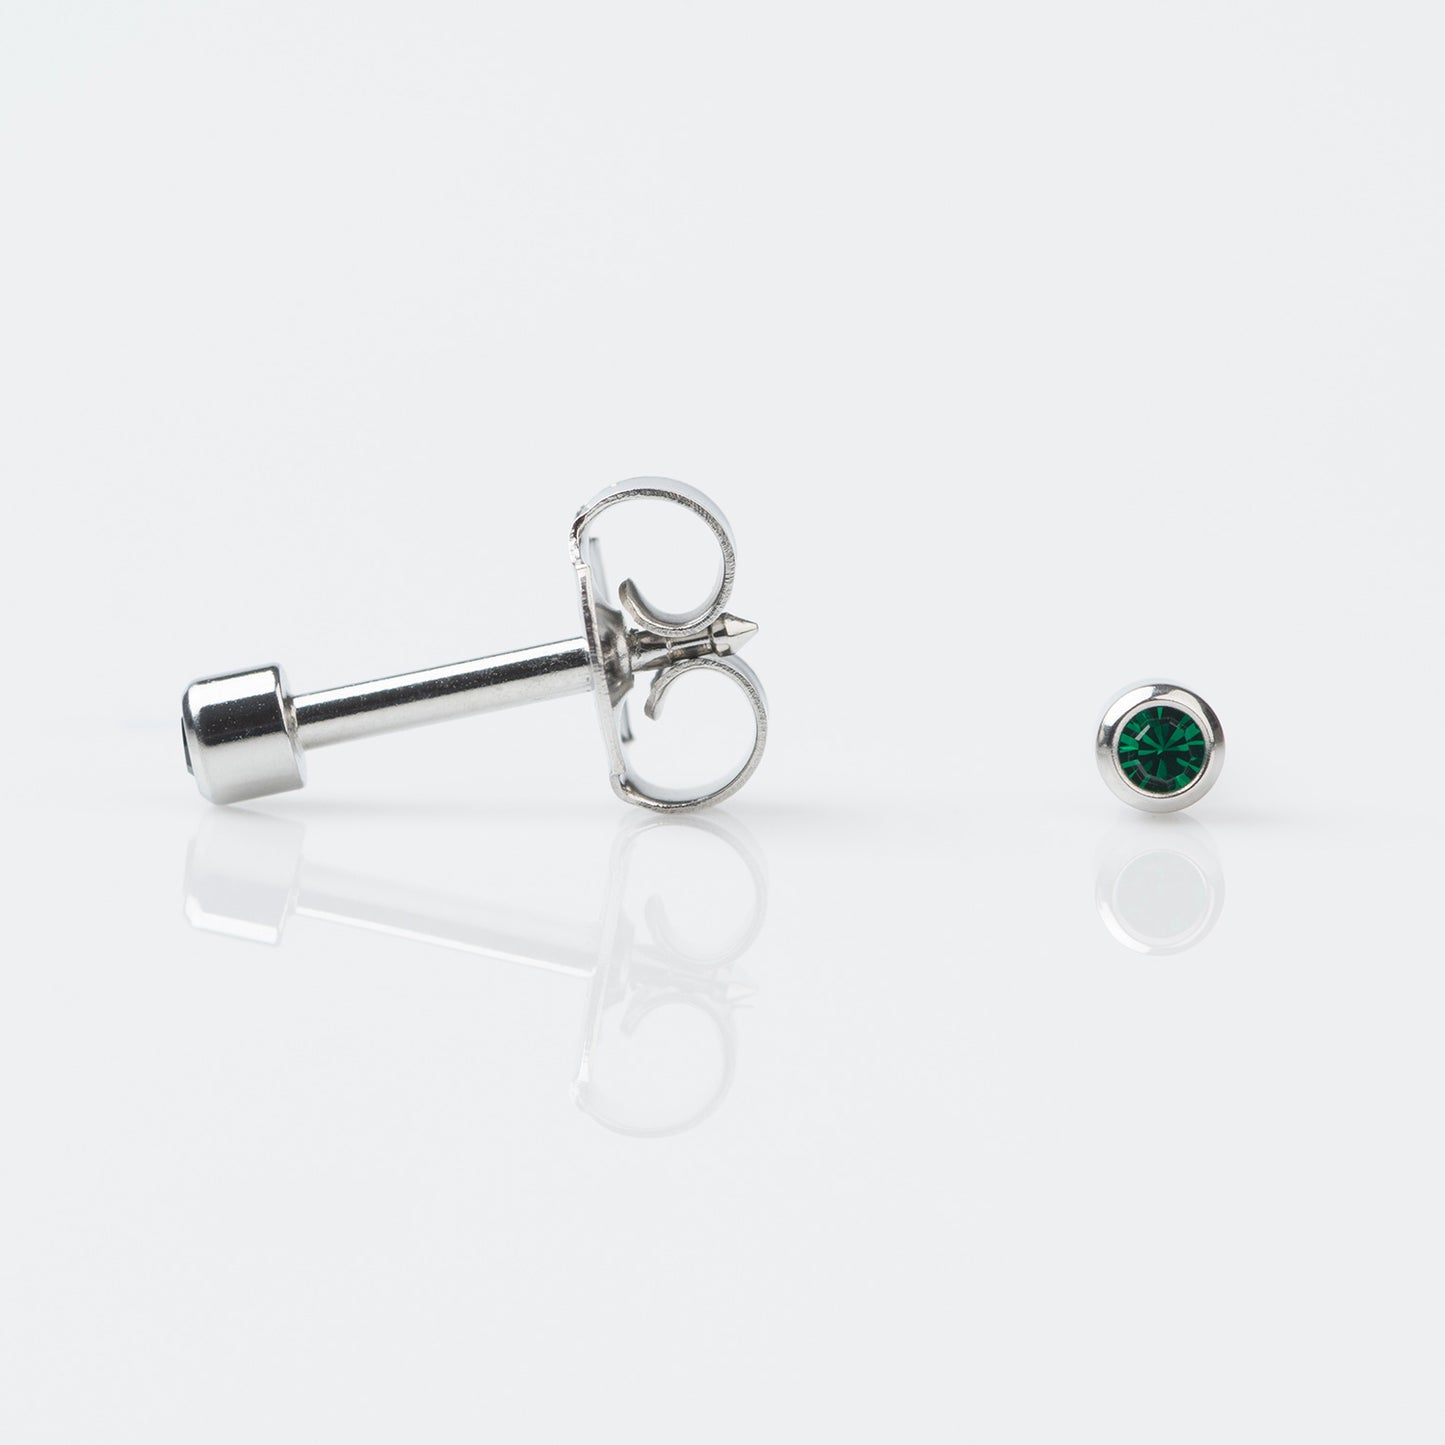 STUDEX Gold Plated Stainless Steel Bezel May - Emerald Earrings